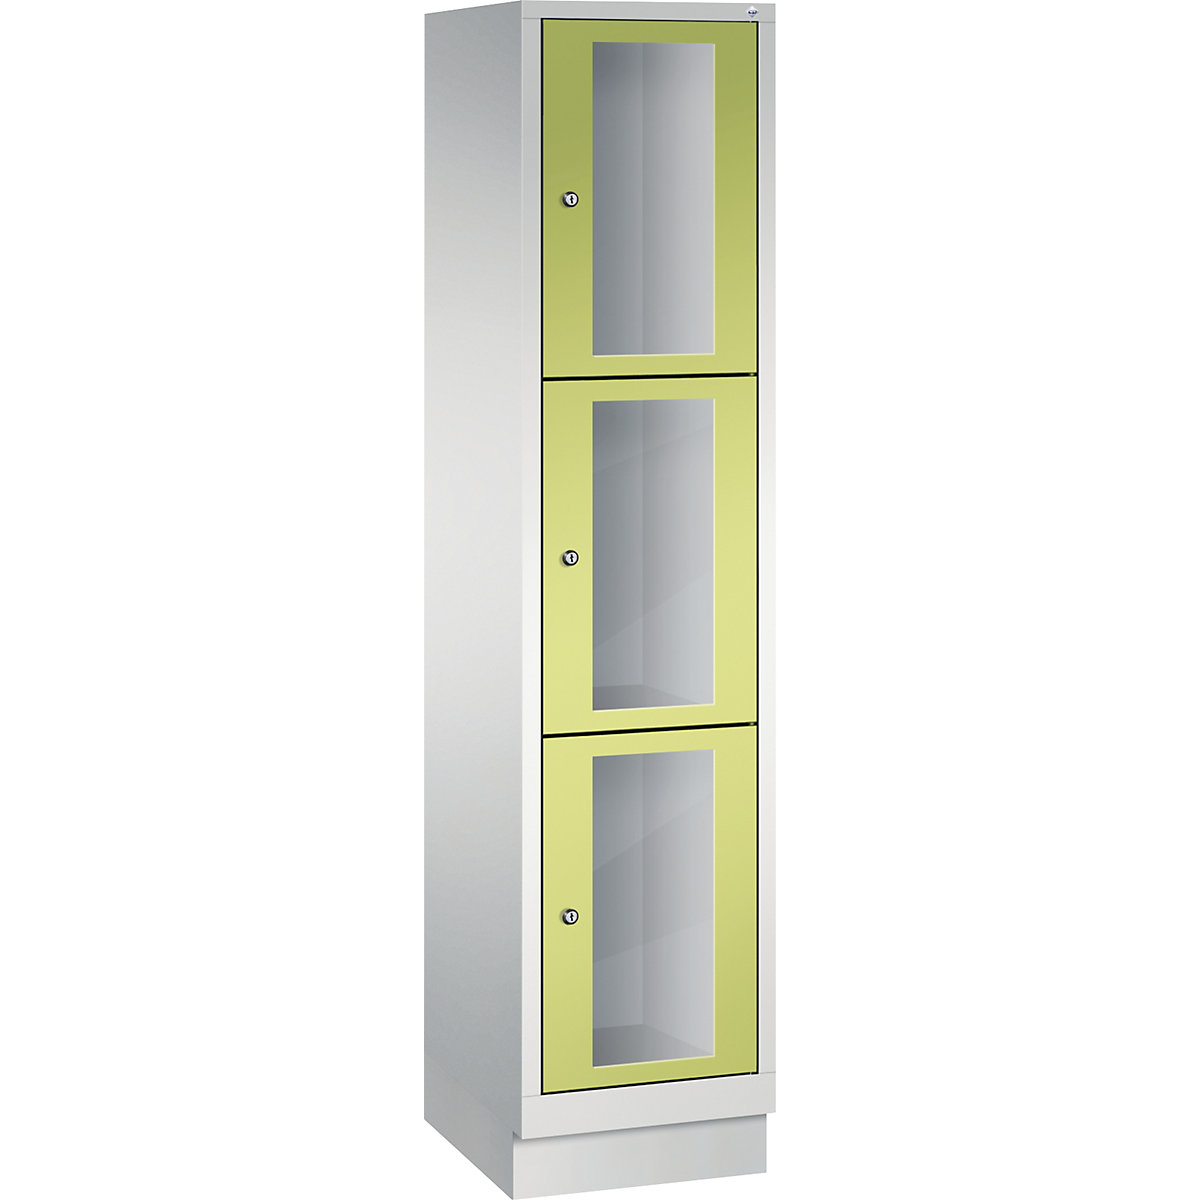 C+P – CLASSIC locker unit, compartment height 510 mm, with plinth, 3 compartments, width 420 mm, viridian green door